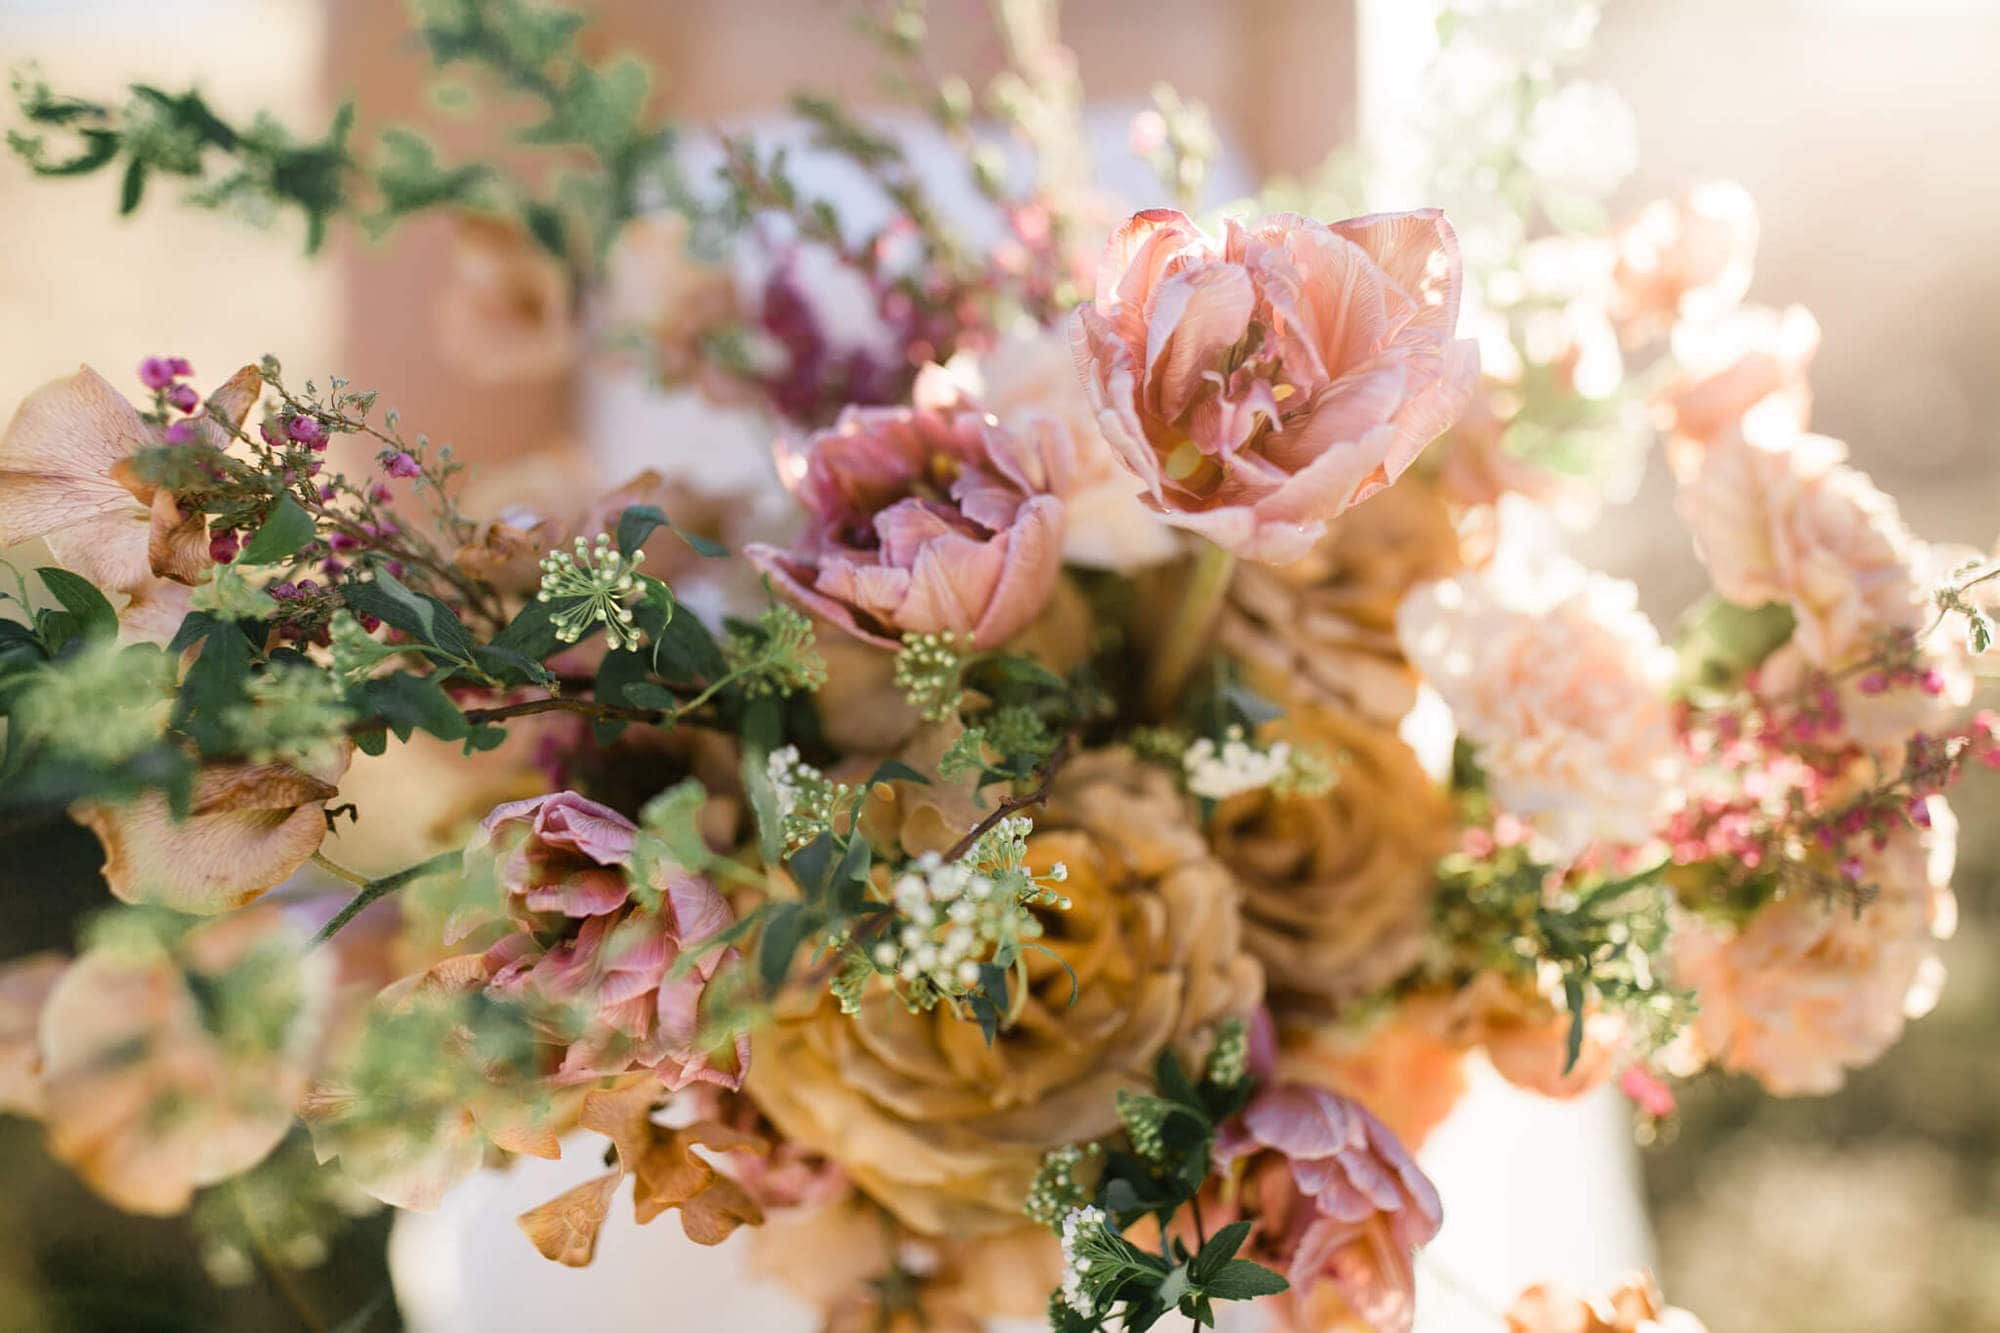 A closeup of  the brides bouquet made up of pink, peach, and copper flowers.